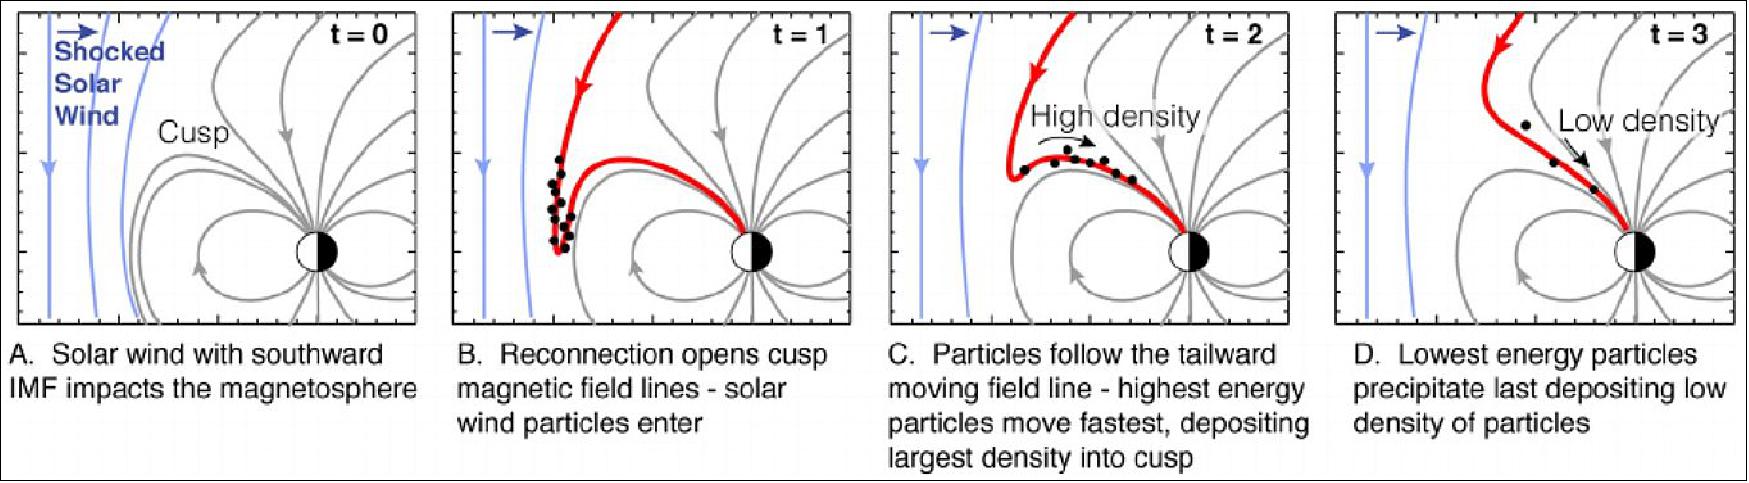 Figure 4: Schematic diagram depicting the creation of time-energy ion dispersions in the magnetospheric cusps. Time advances from the left to the right. Blue lines represent magnetic field lines in the shocked solar wind of the magnetosheath. Gray lines represent magnetospheric field lines. The newly reconnected magnetic field line (red) convects tailward in the diagram (to the right), depositing the higher energy and density particles at the equatorial edge and lower energy and density at higher latitude in the cusp (image credit: Collaboration Team)